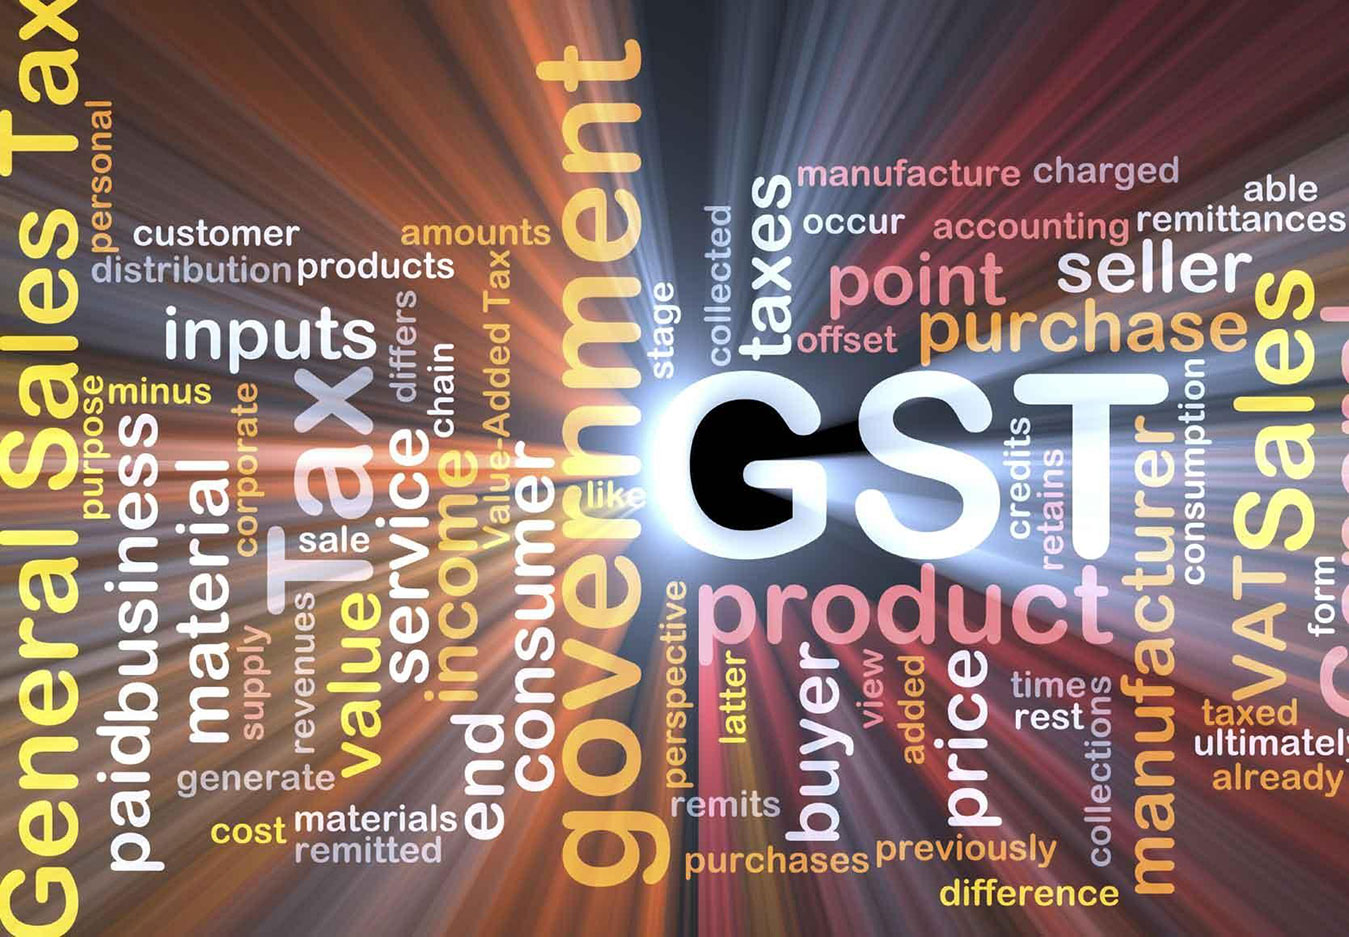 Impact of GST on the Indian Economy